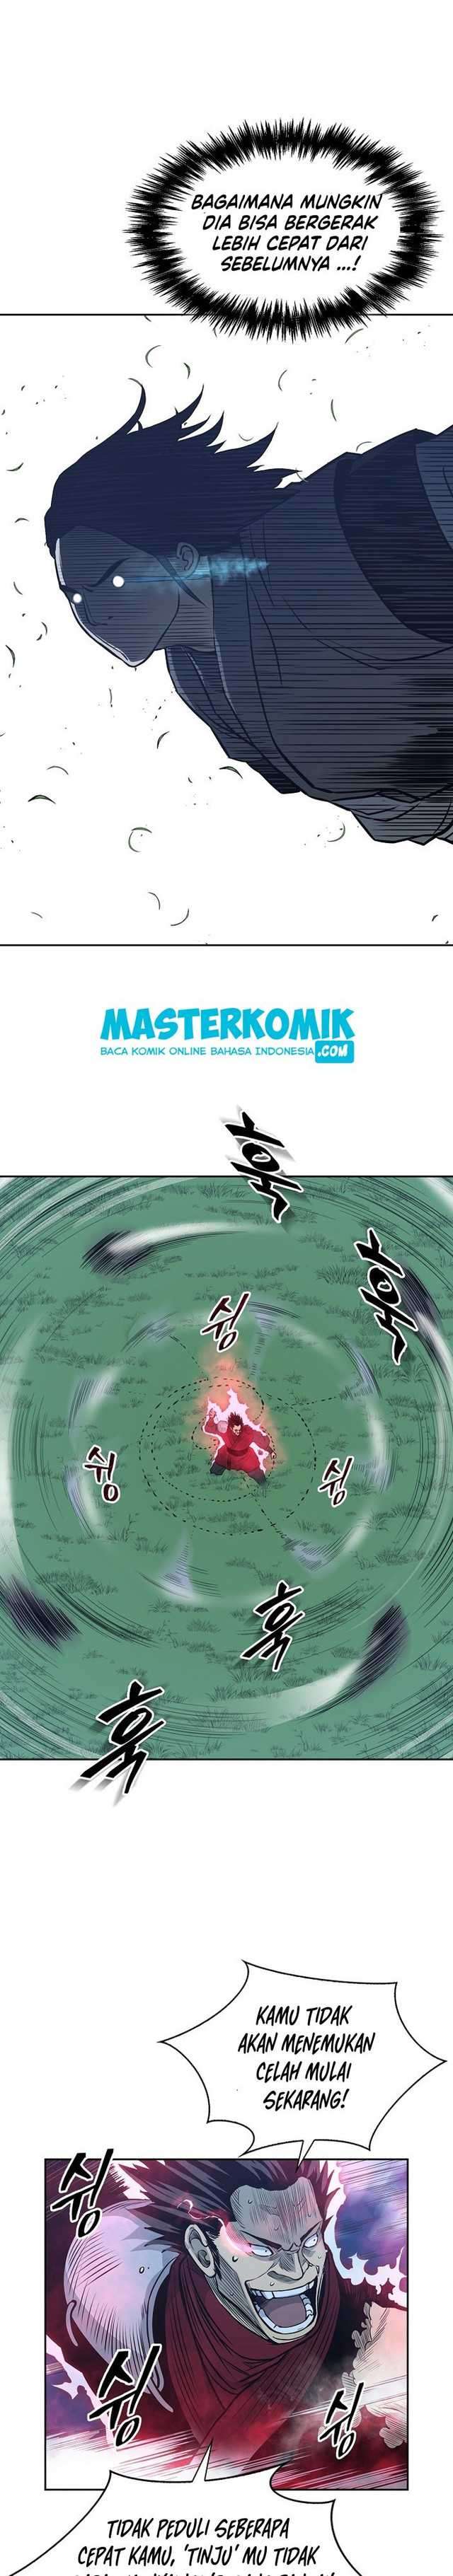 Record of the War God Chapter 84